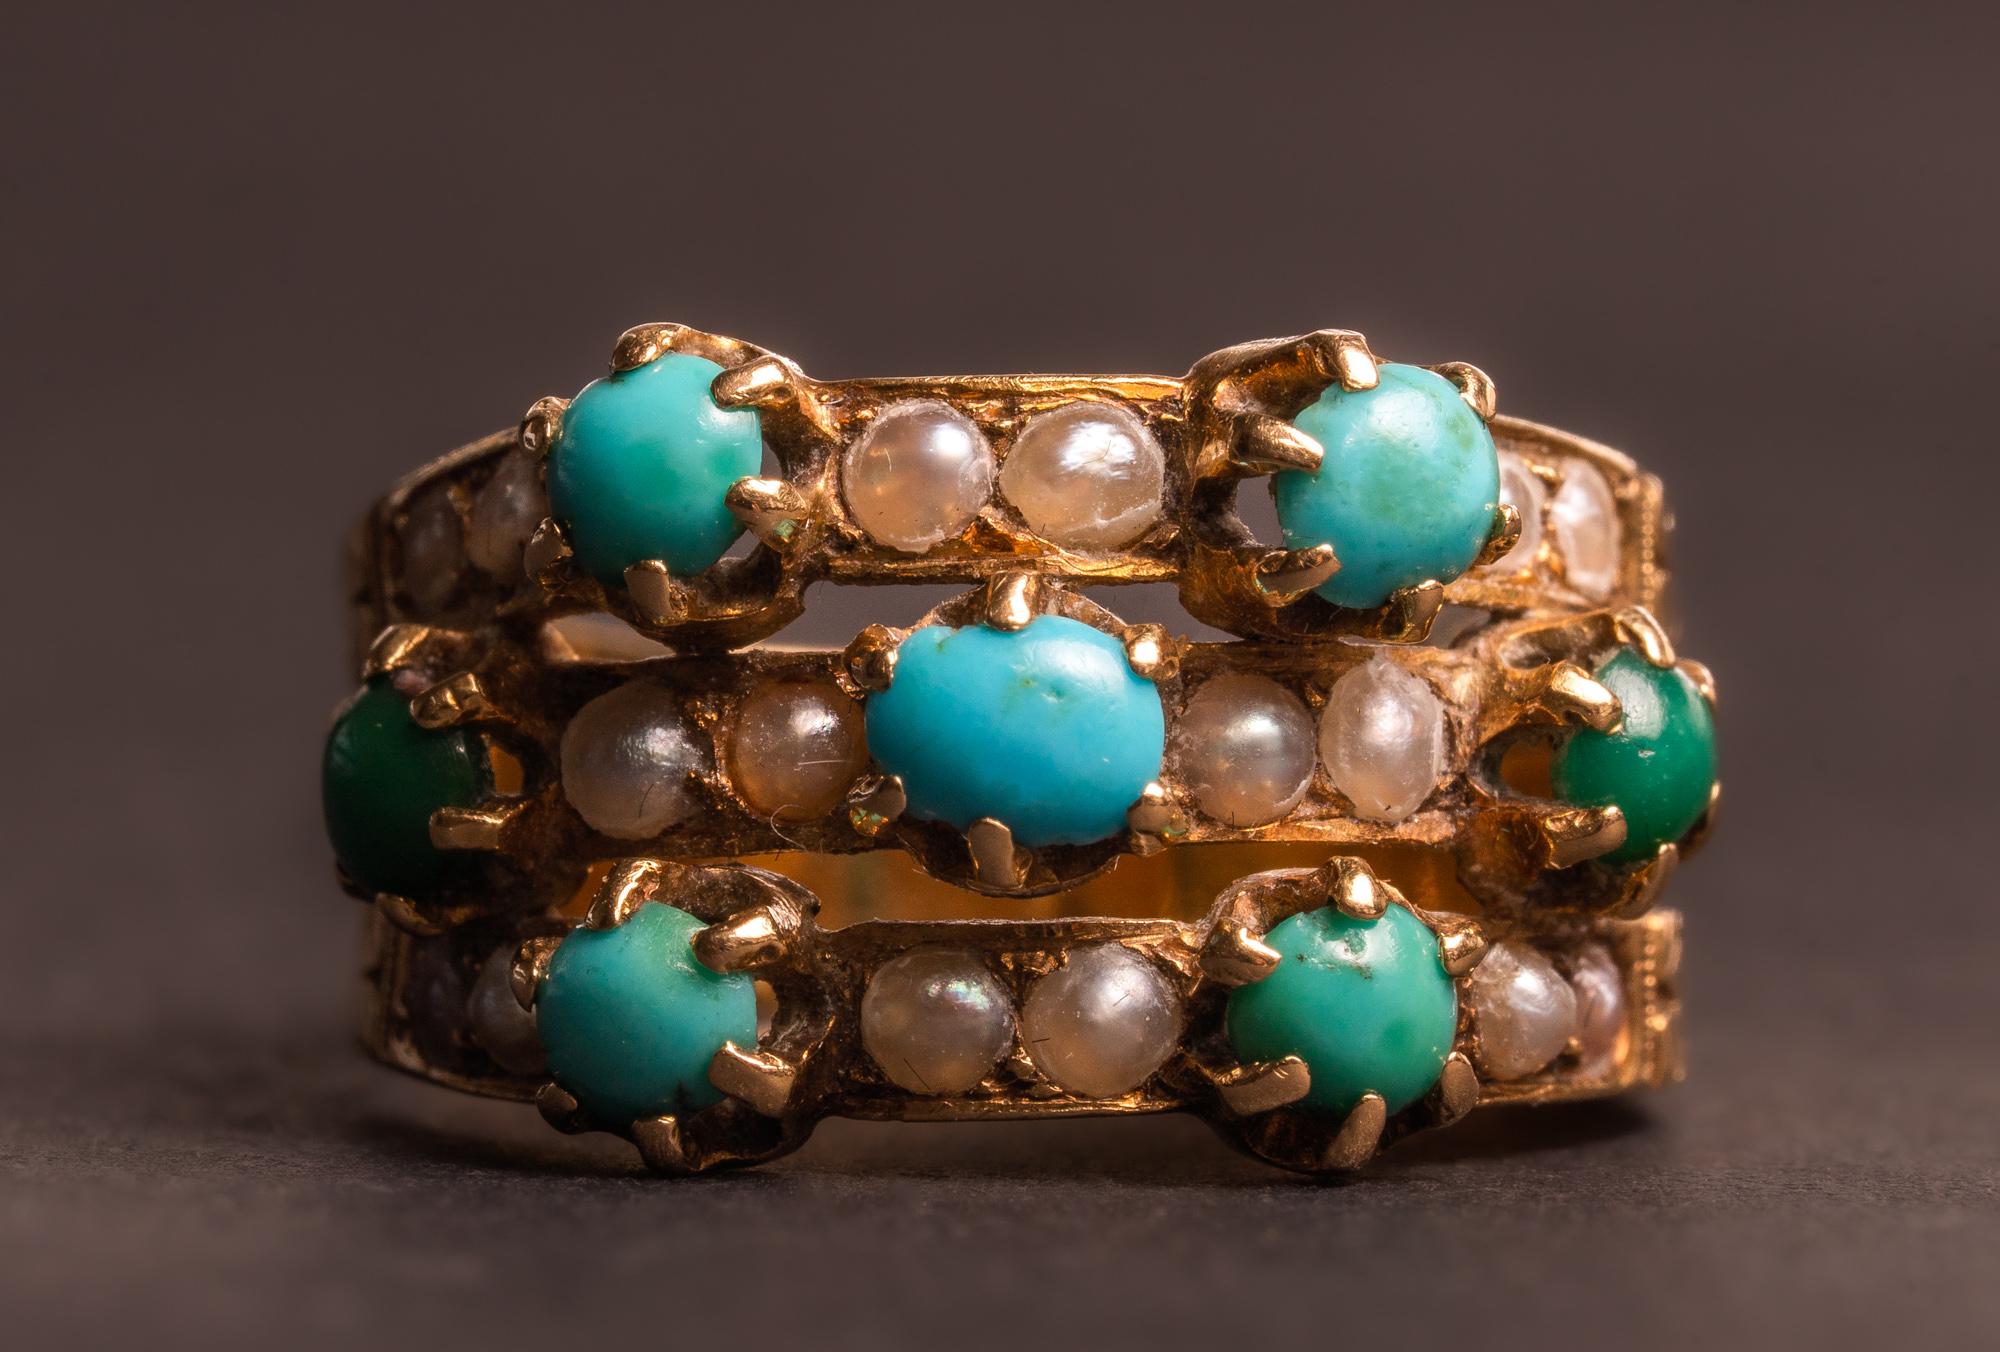 Cabochon Antique Turquoise and Pearl Harem Gold Ring, Antique French 18k Gold Ring 